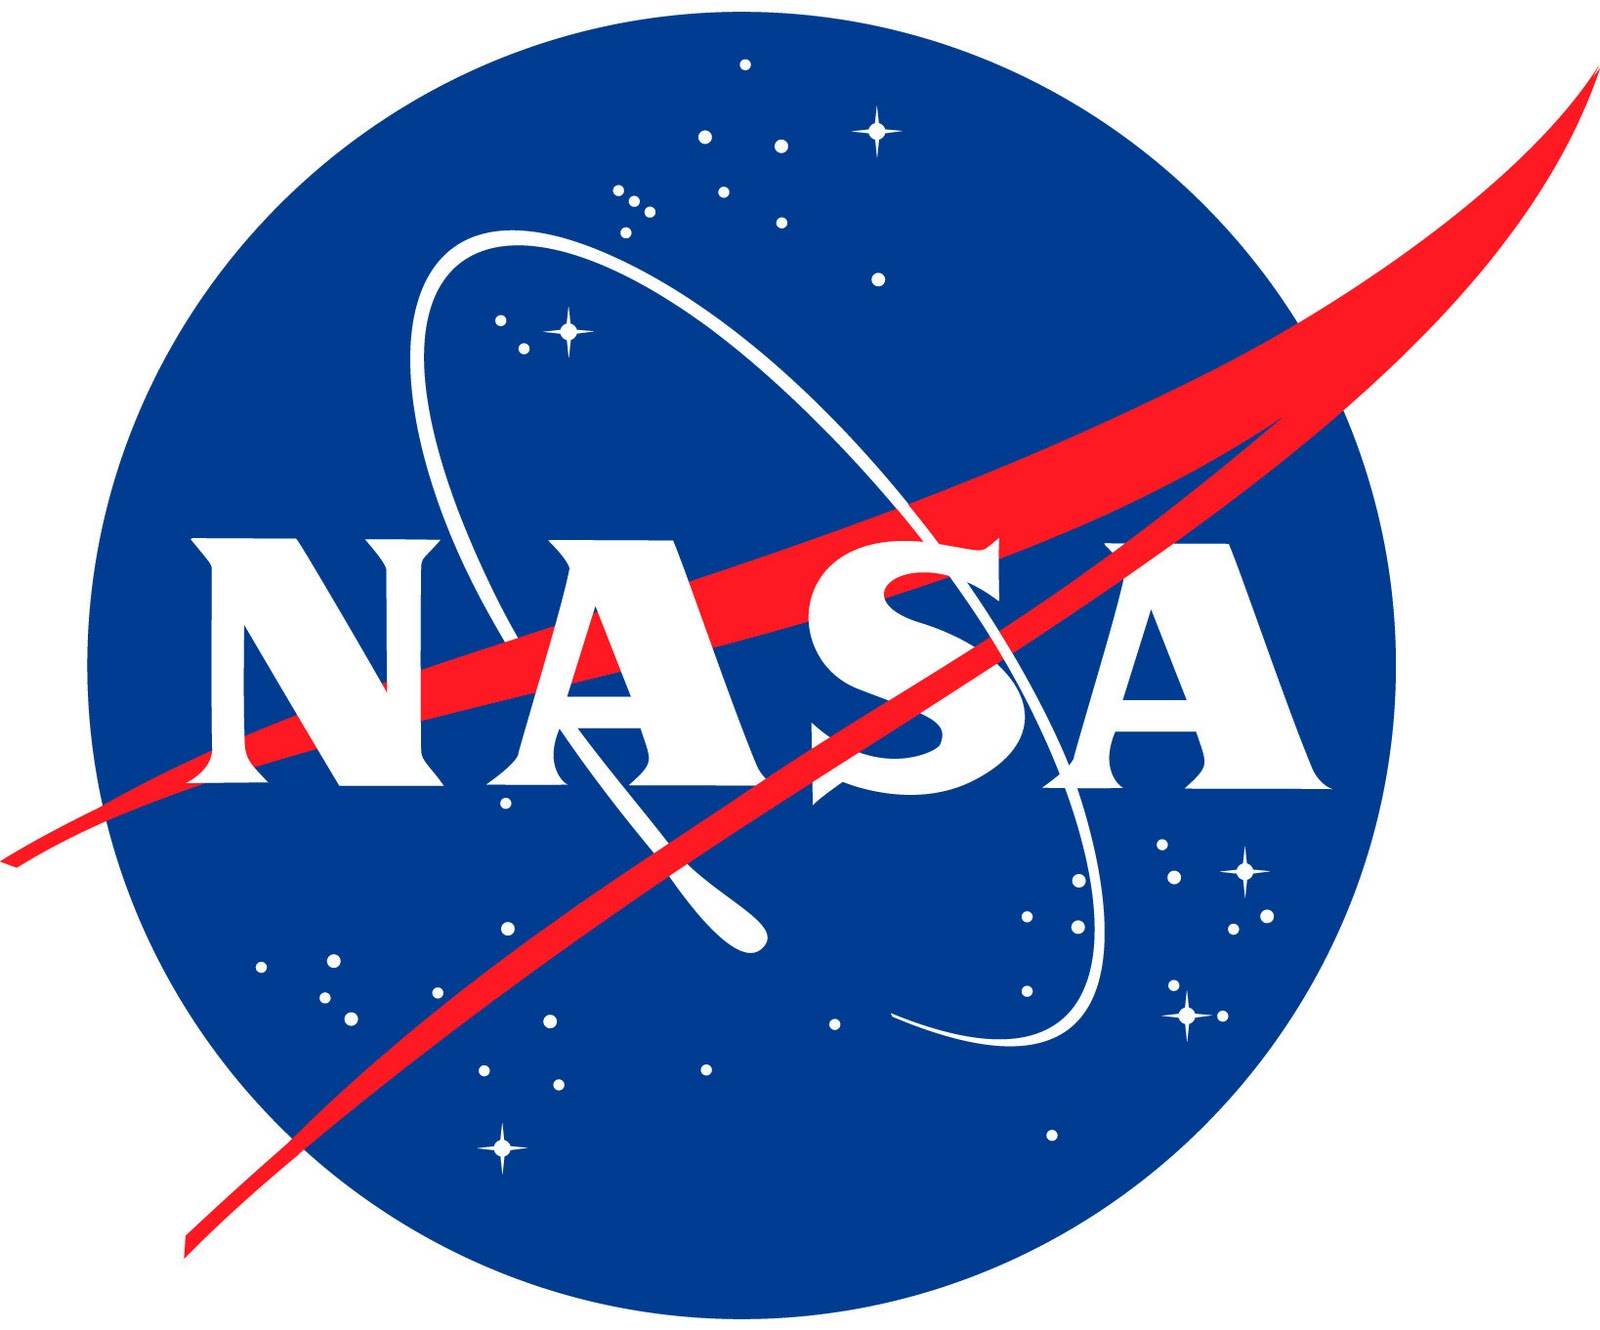 What constellation is on the NASA logo? - Space Exploration Stack ...